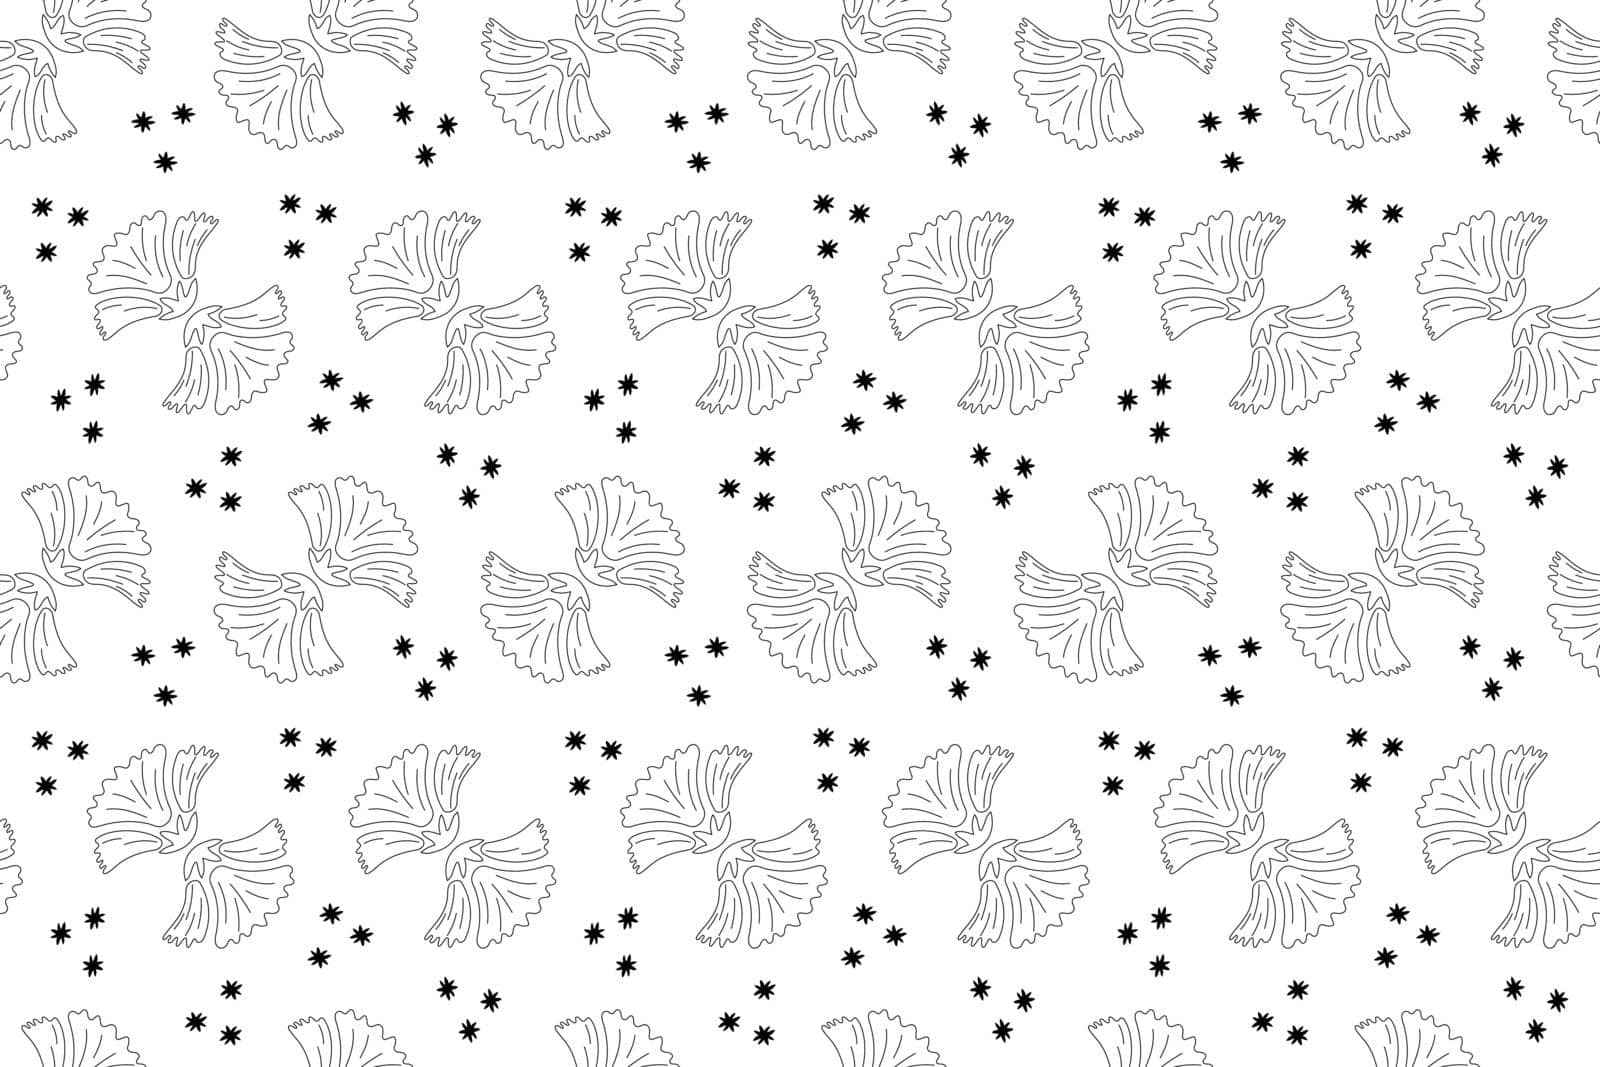 Stylized floral endless background. Floral seamless pattern, hand drawn line art leaves on white. Monochrome, botanical forest plants tree foliage. Vector illustration